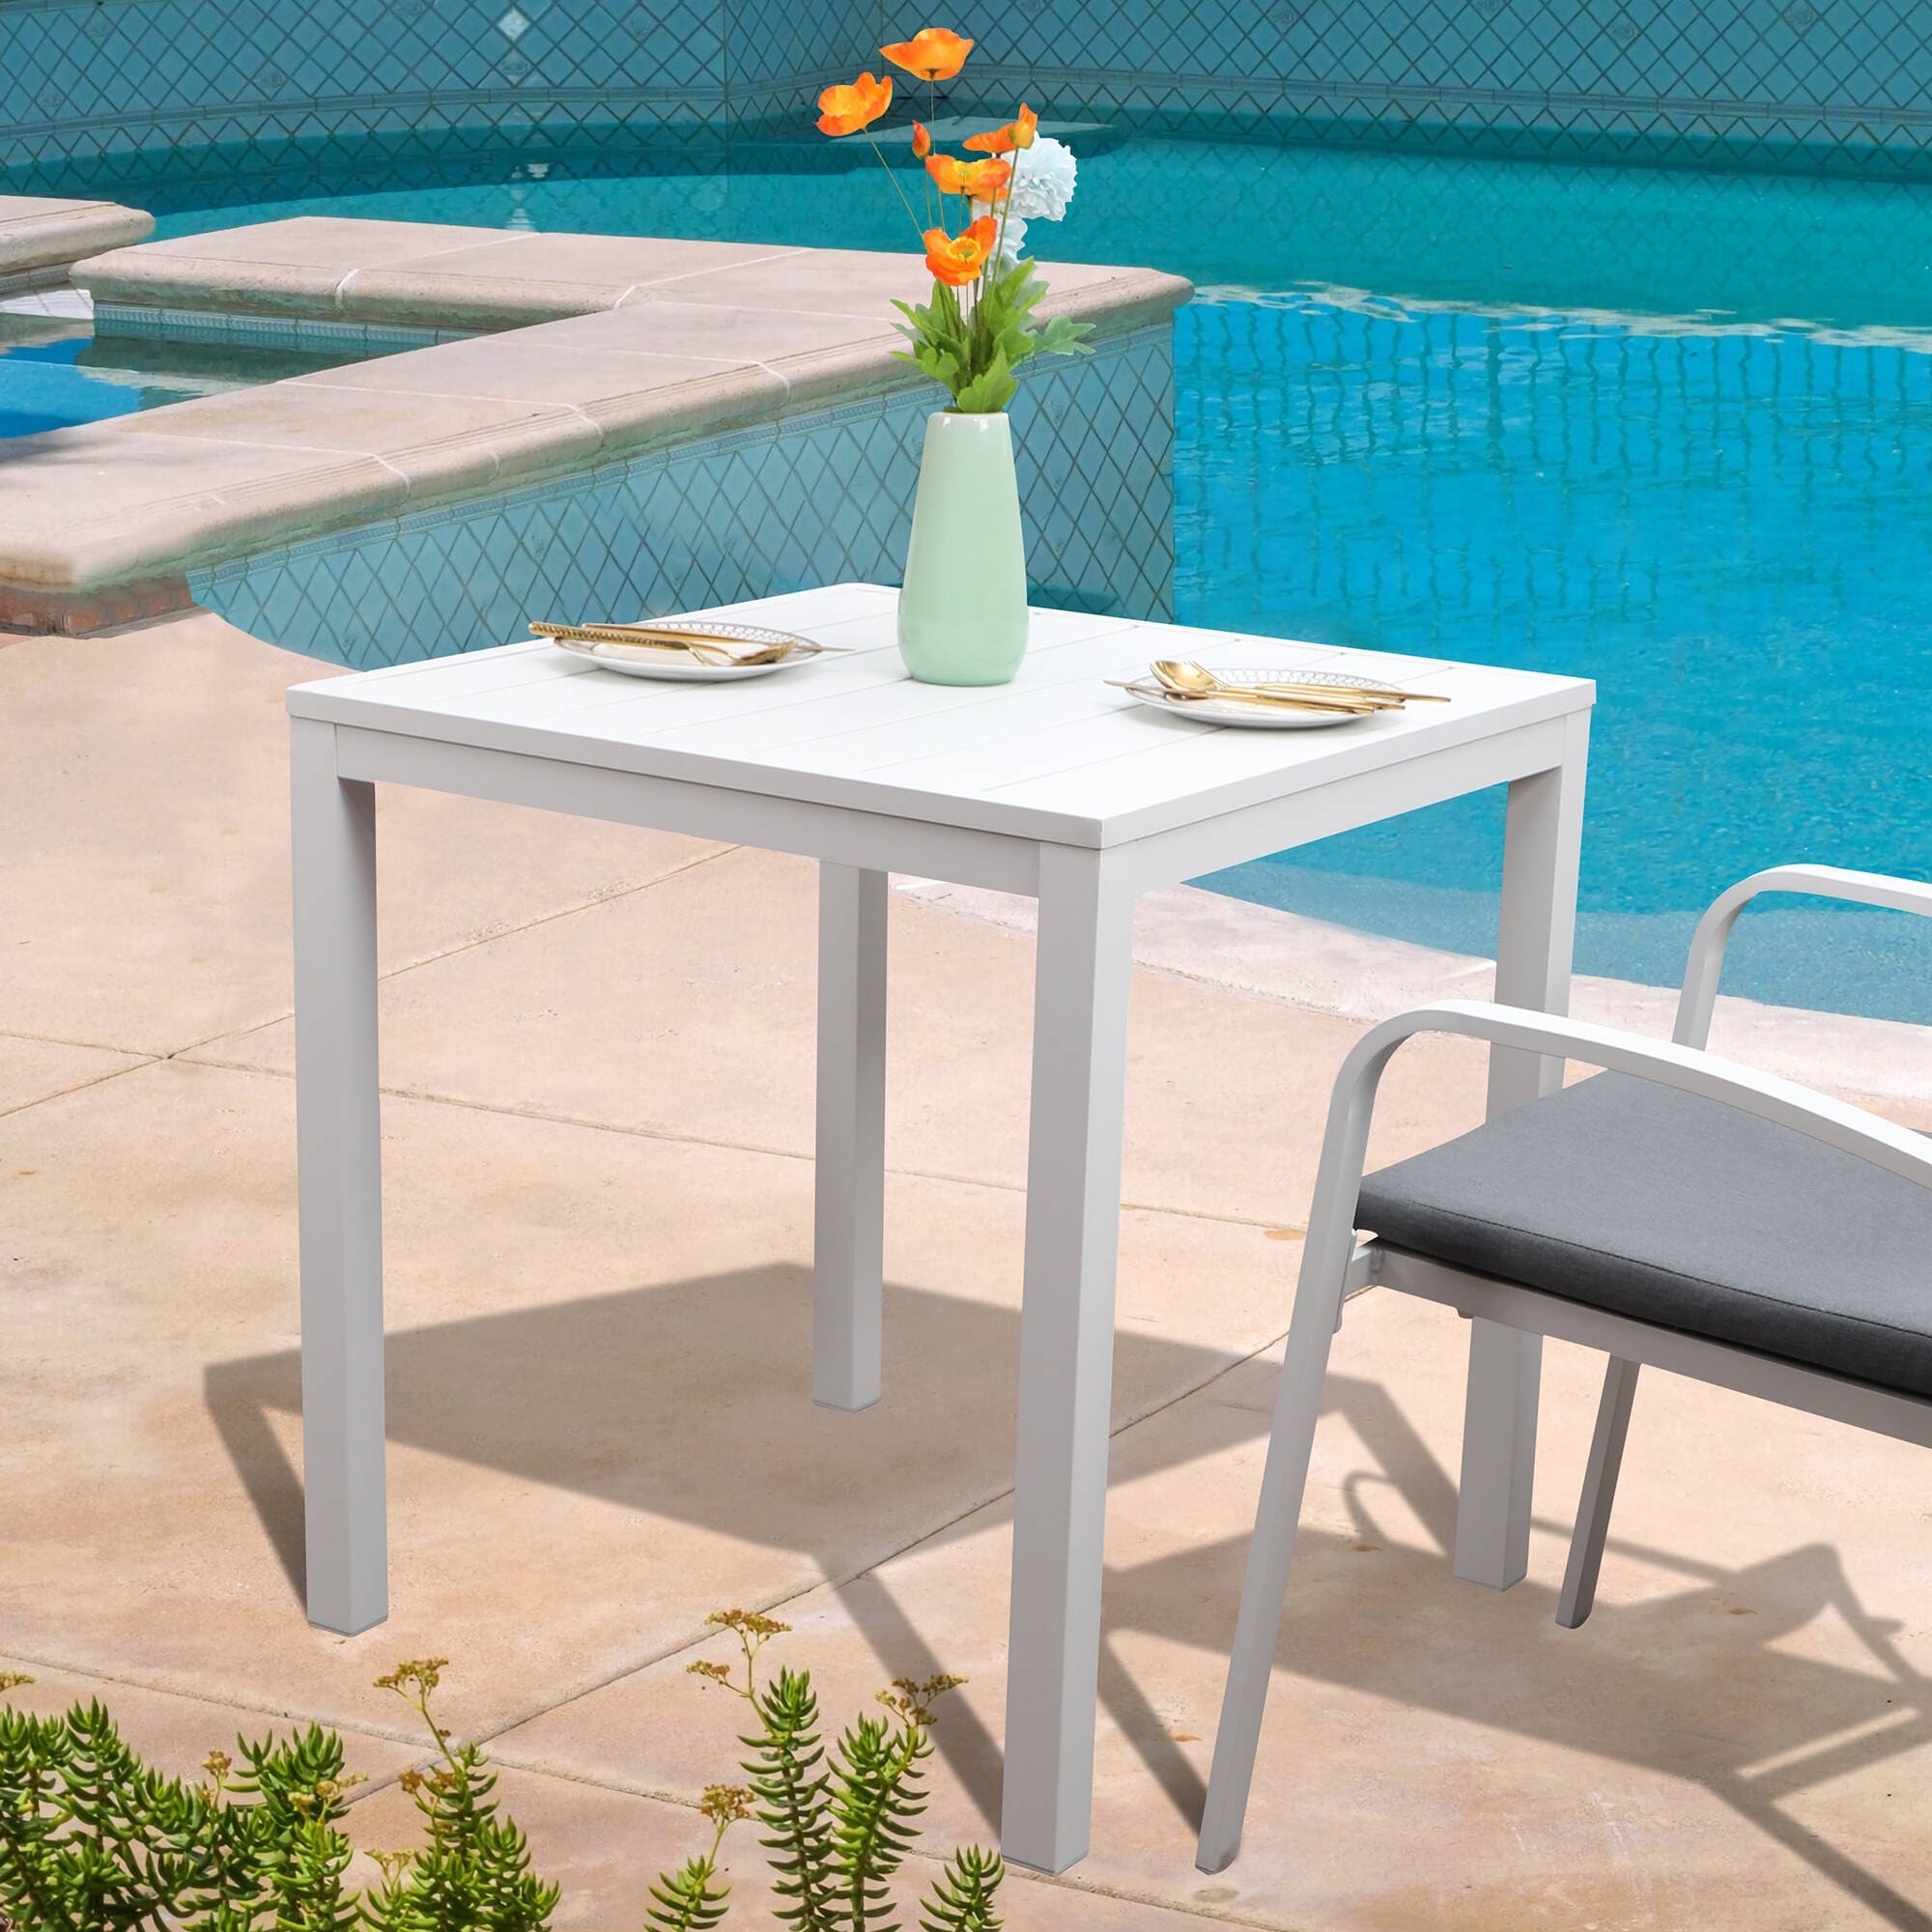 35" x 35" Aluminum Outdoor Square Dining Table